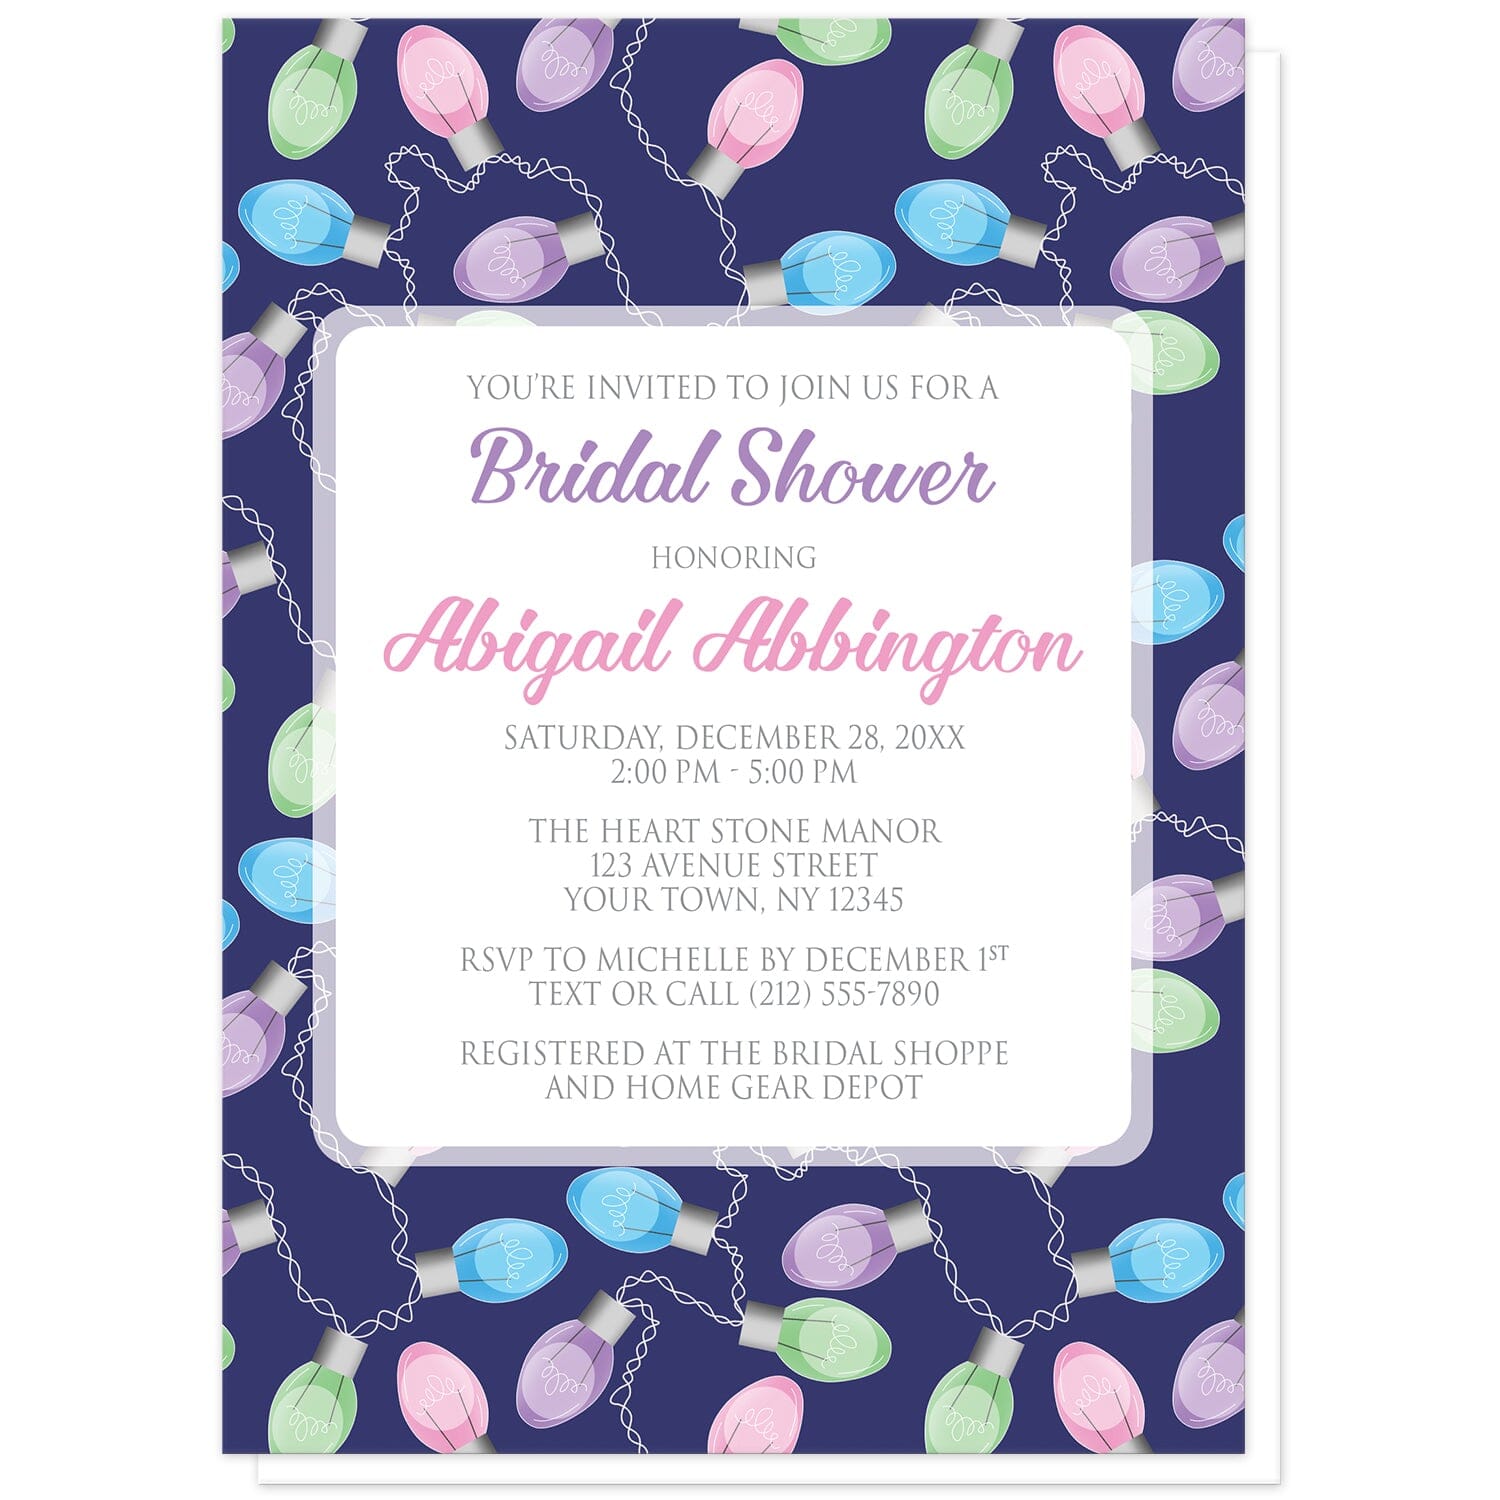 Holiday Lights Pattern Bridal Shower Invitations at Artistically Invited. Holiday lights pattern bridal shower invitations designed with your personalized celebration details custom printed in purple, pink, and gray in a white square frame design over a background illustrated with a string of colorful holiday lights in a pattern over a navy blue color. The bulb colors on the string in the design are pink, purple, blue, and green.